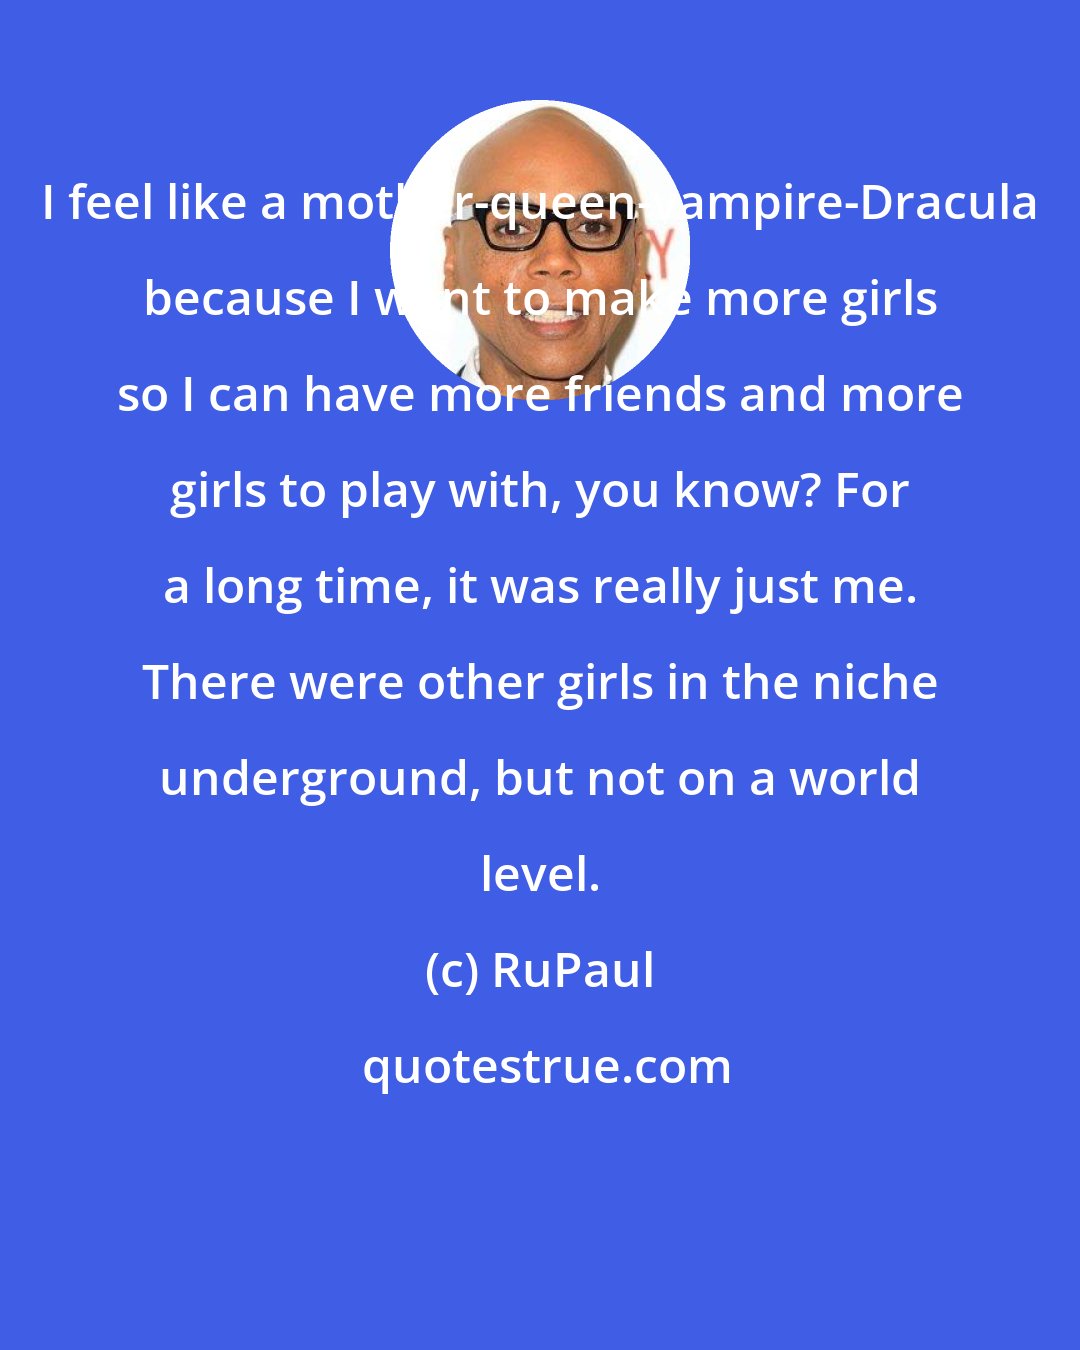 RuPaul: I feel like a mother-queen-vampire-Dracula because I want to make more girls so I can have more friends and more girls to play with, you know? For a long time, it was really just me. There were other girls in the niche underground, but not on a world level.